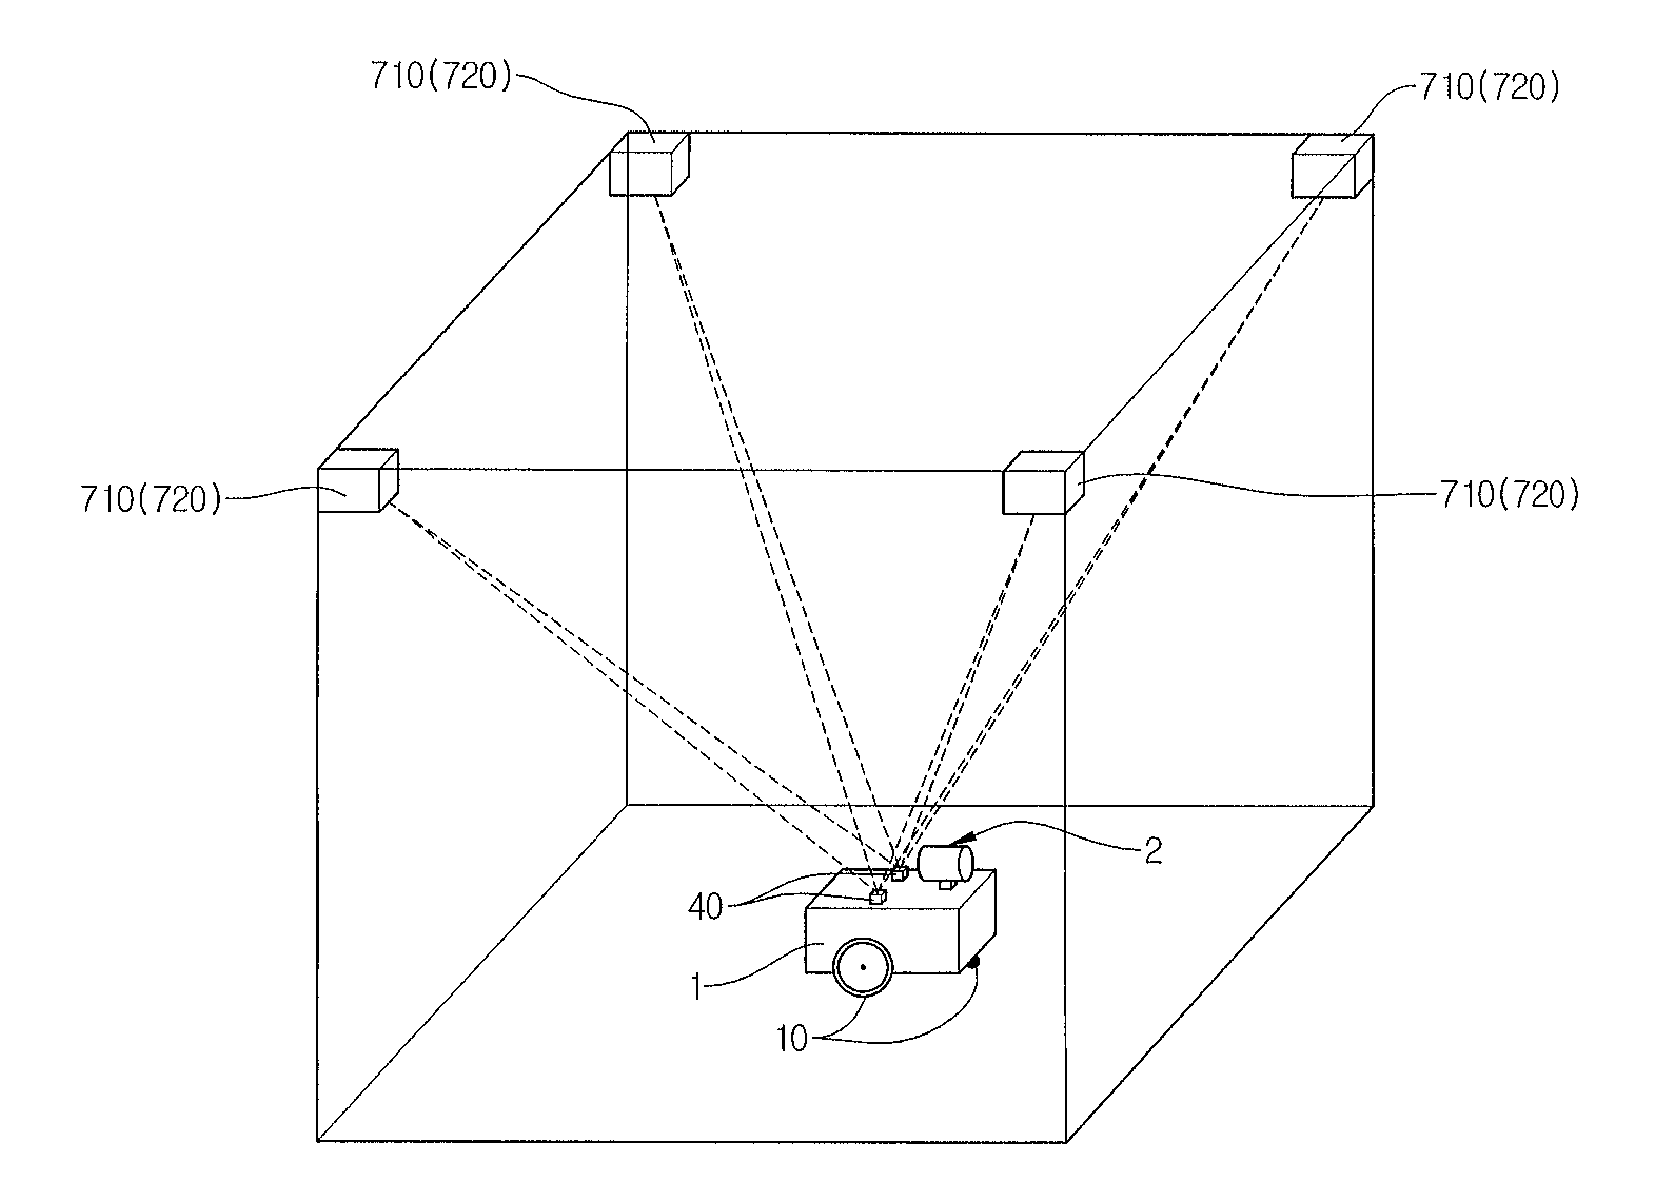 System and method of controlling vision device for tracking target based on motion commands